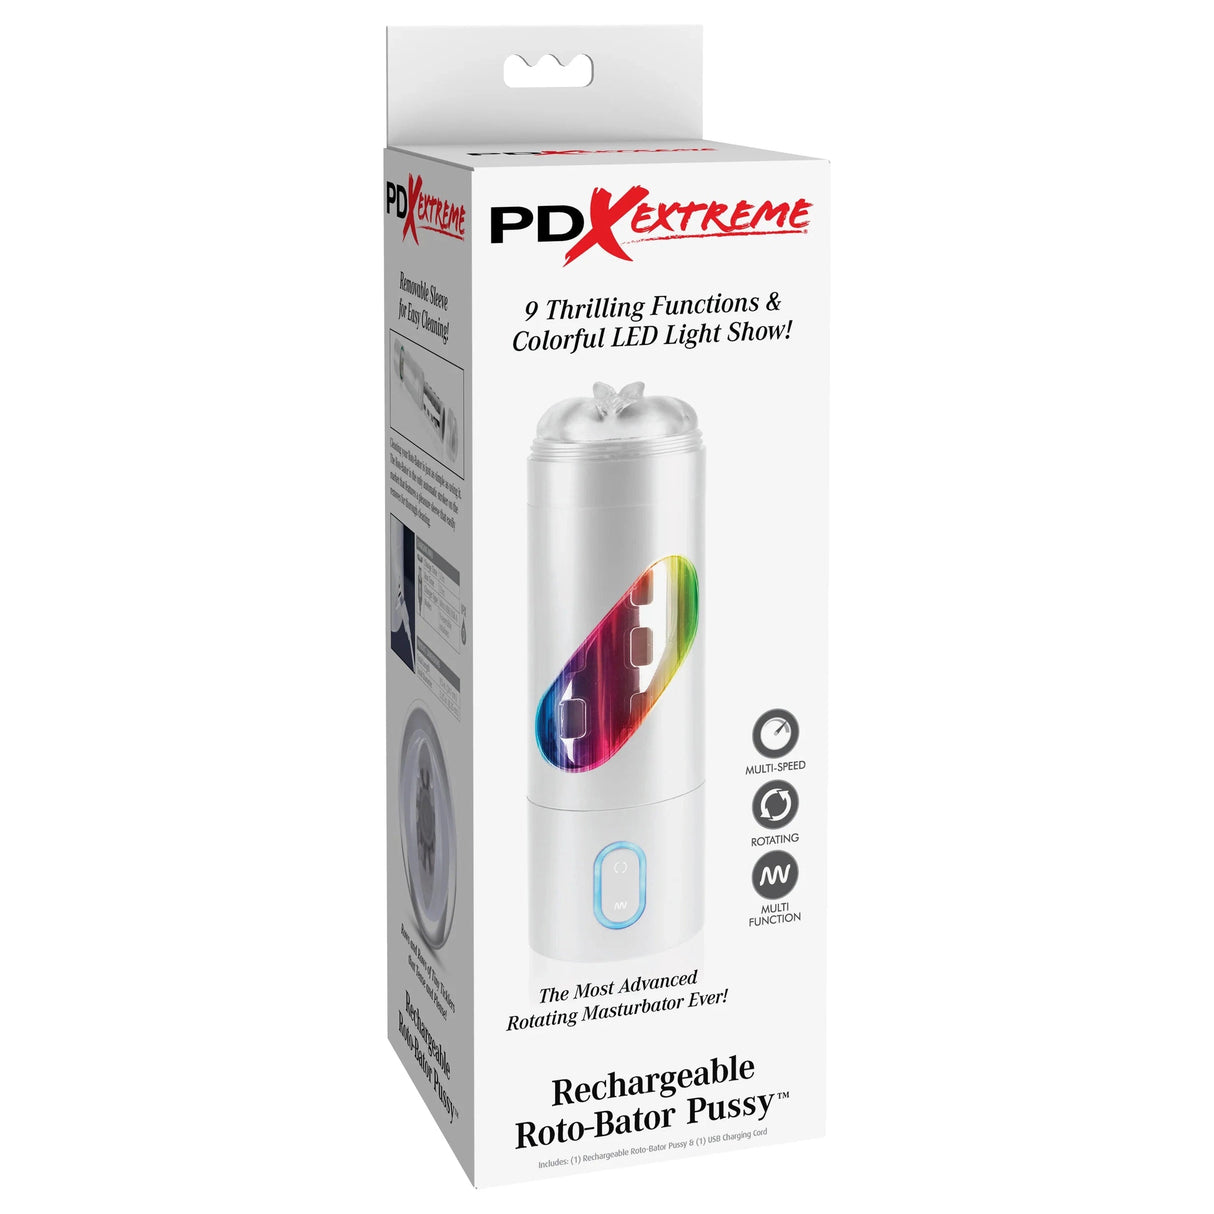 Pipedream Extreme Rechargeable Roto-Bator Pussy